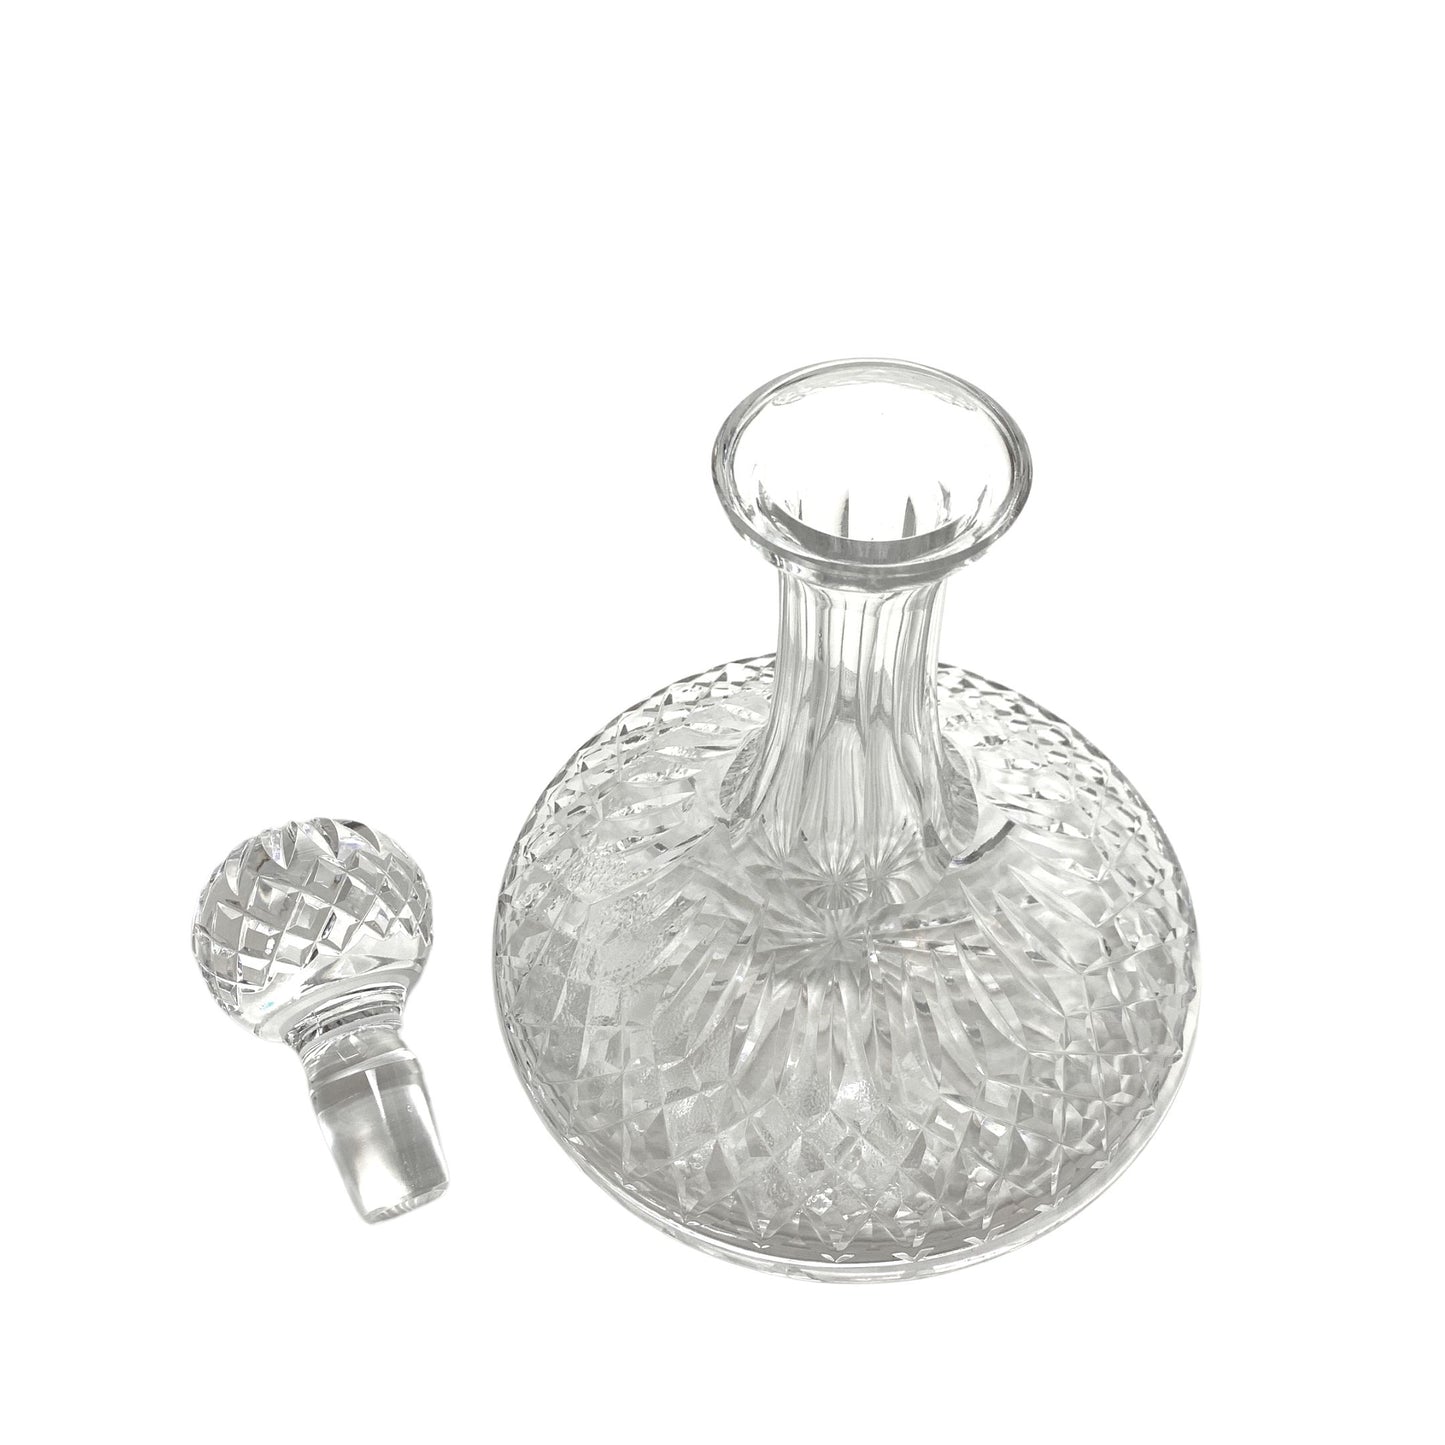 Waterford Lismore Crystal Ships Decanter With Stopper